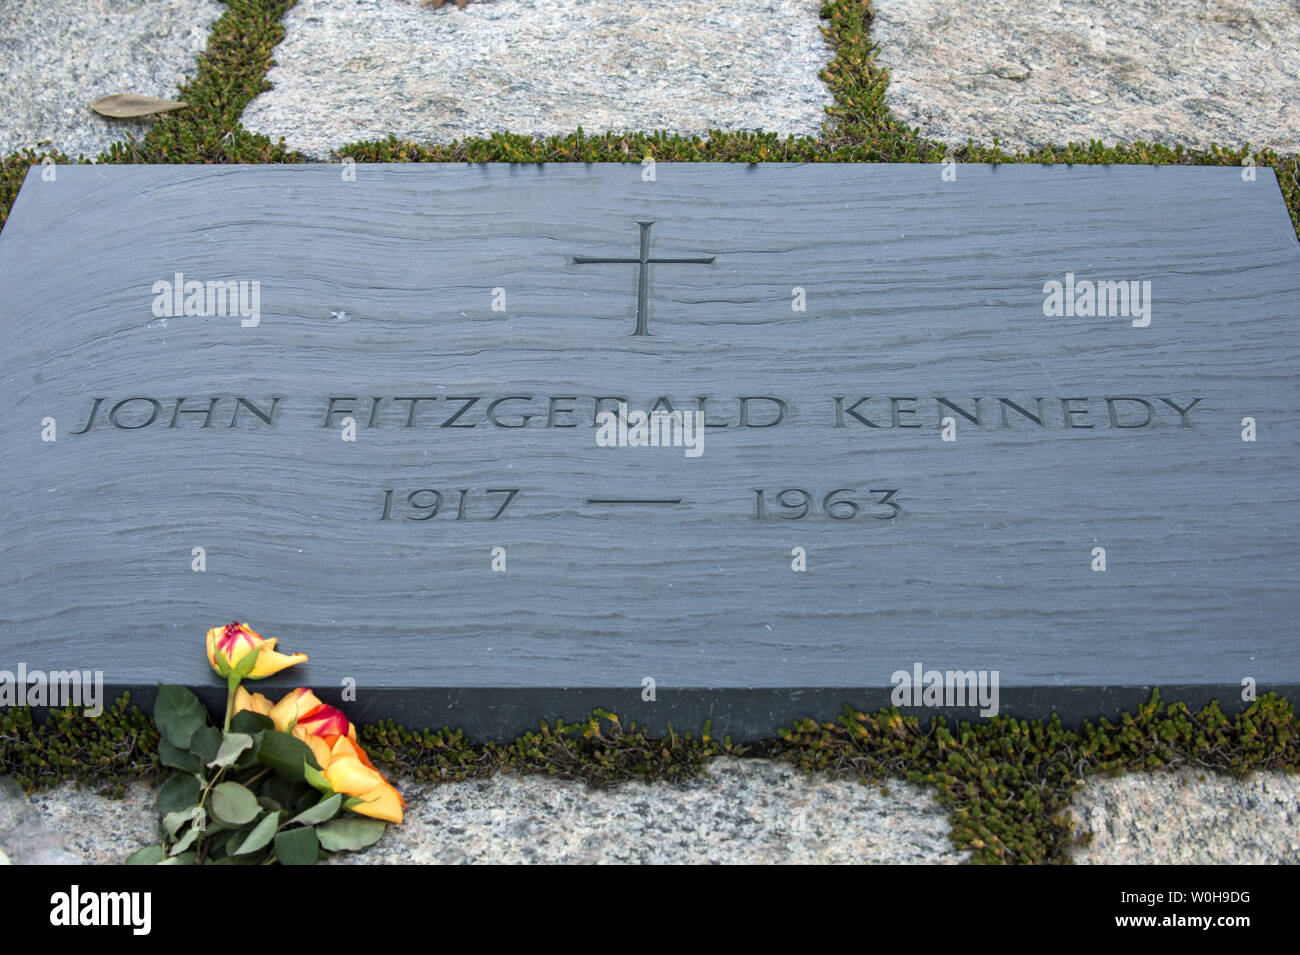 Flowers lay beside the grave of President John Fitzgerald Kennedy at Arlington National Cemetery in Arlington, Virginia on November 18, 2013.  Kennedy was the 35th president of the United States and November 22nd will mark the 50th Anniversary of his assassination in Dallas, Texas.    UPI/Pat Benic Stock Photo